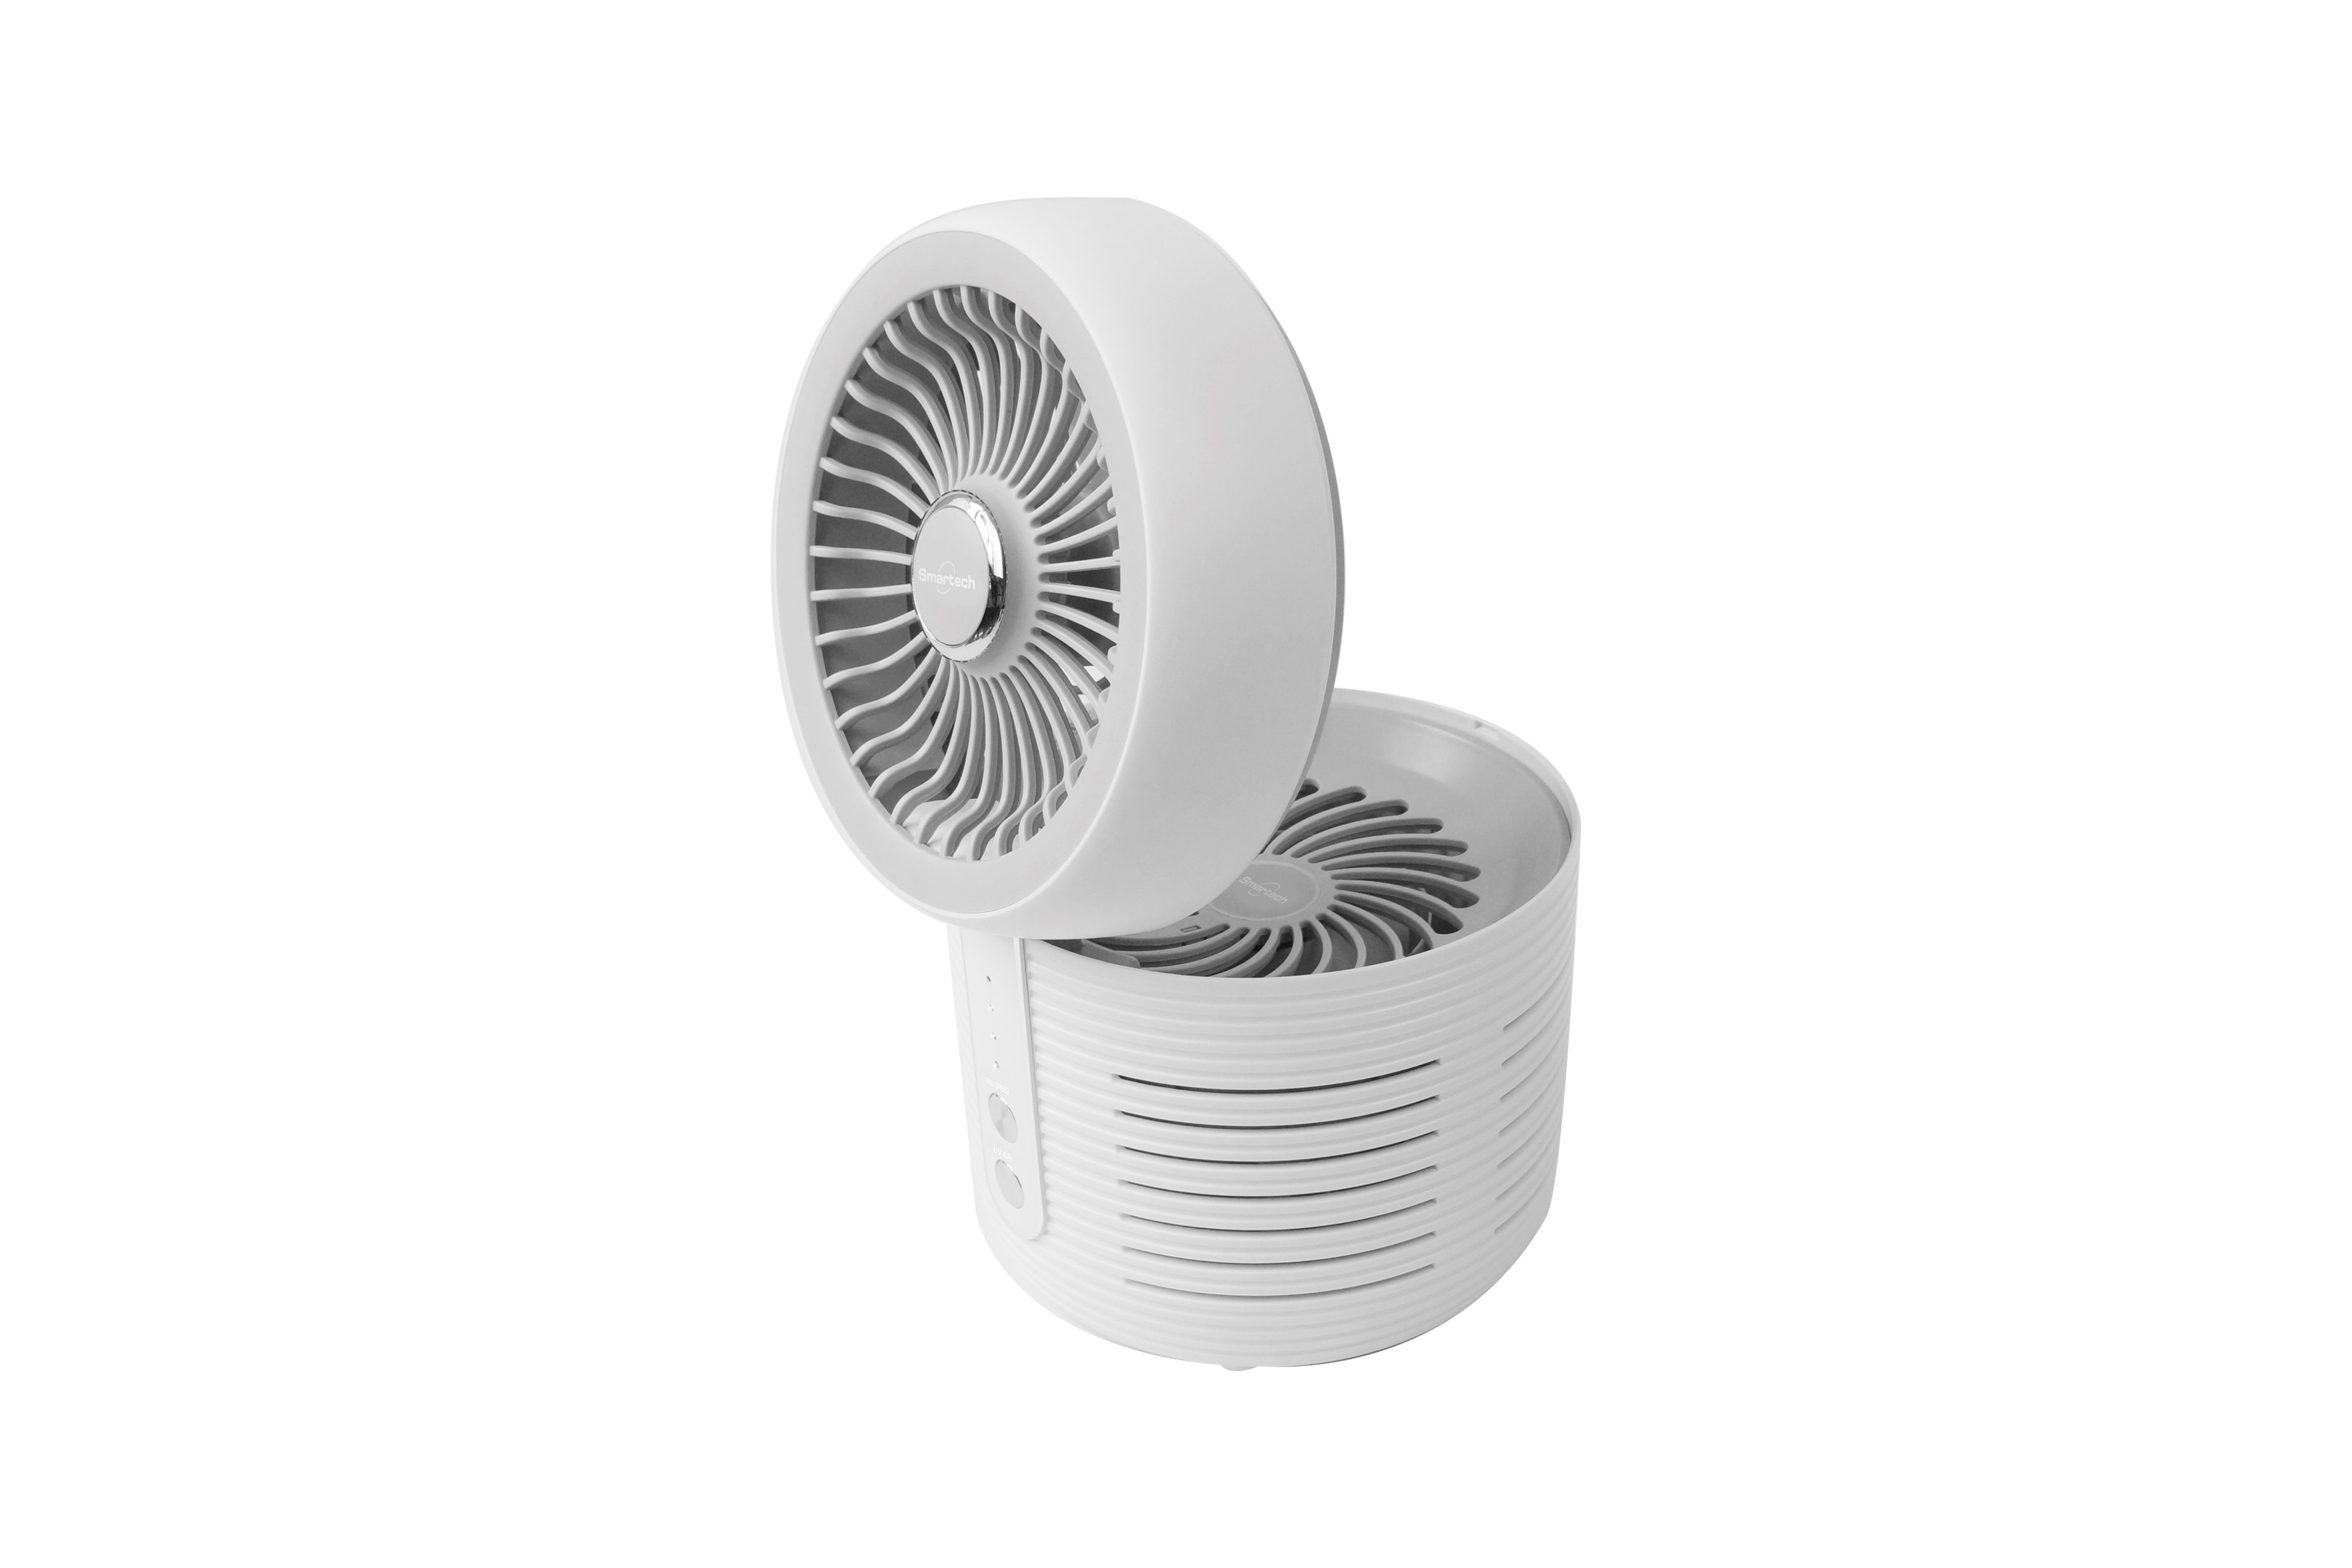 Smartech Round Air 2 in 1 UV HEPA Air Purifier and Circulation Fan (White), , large image number 1